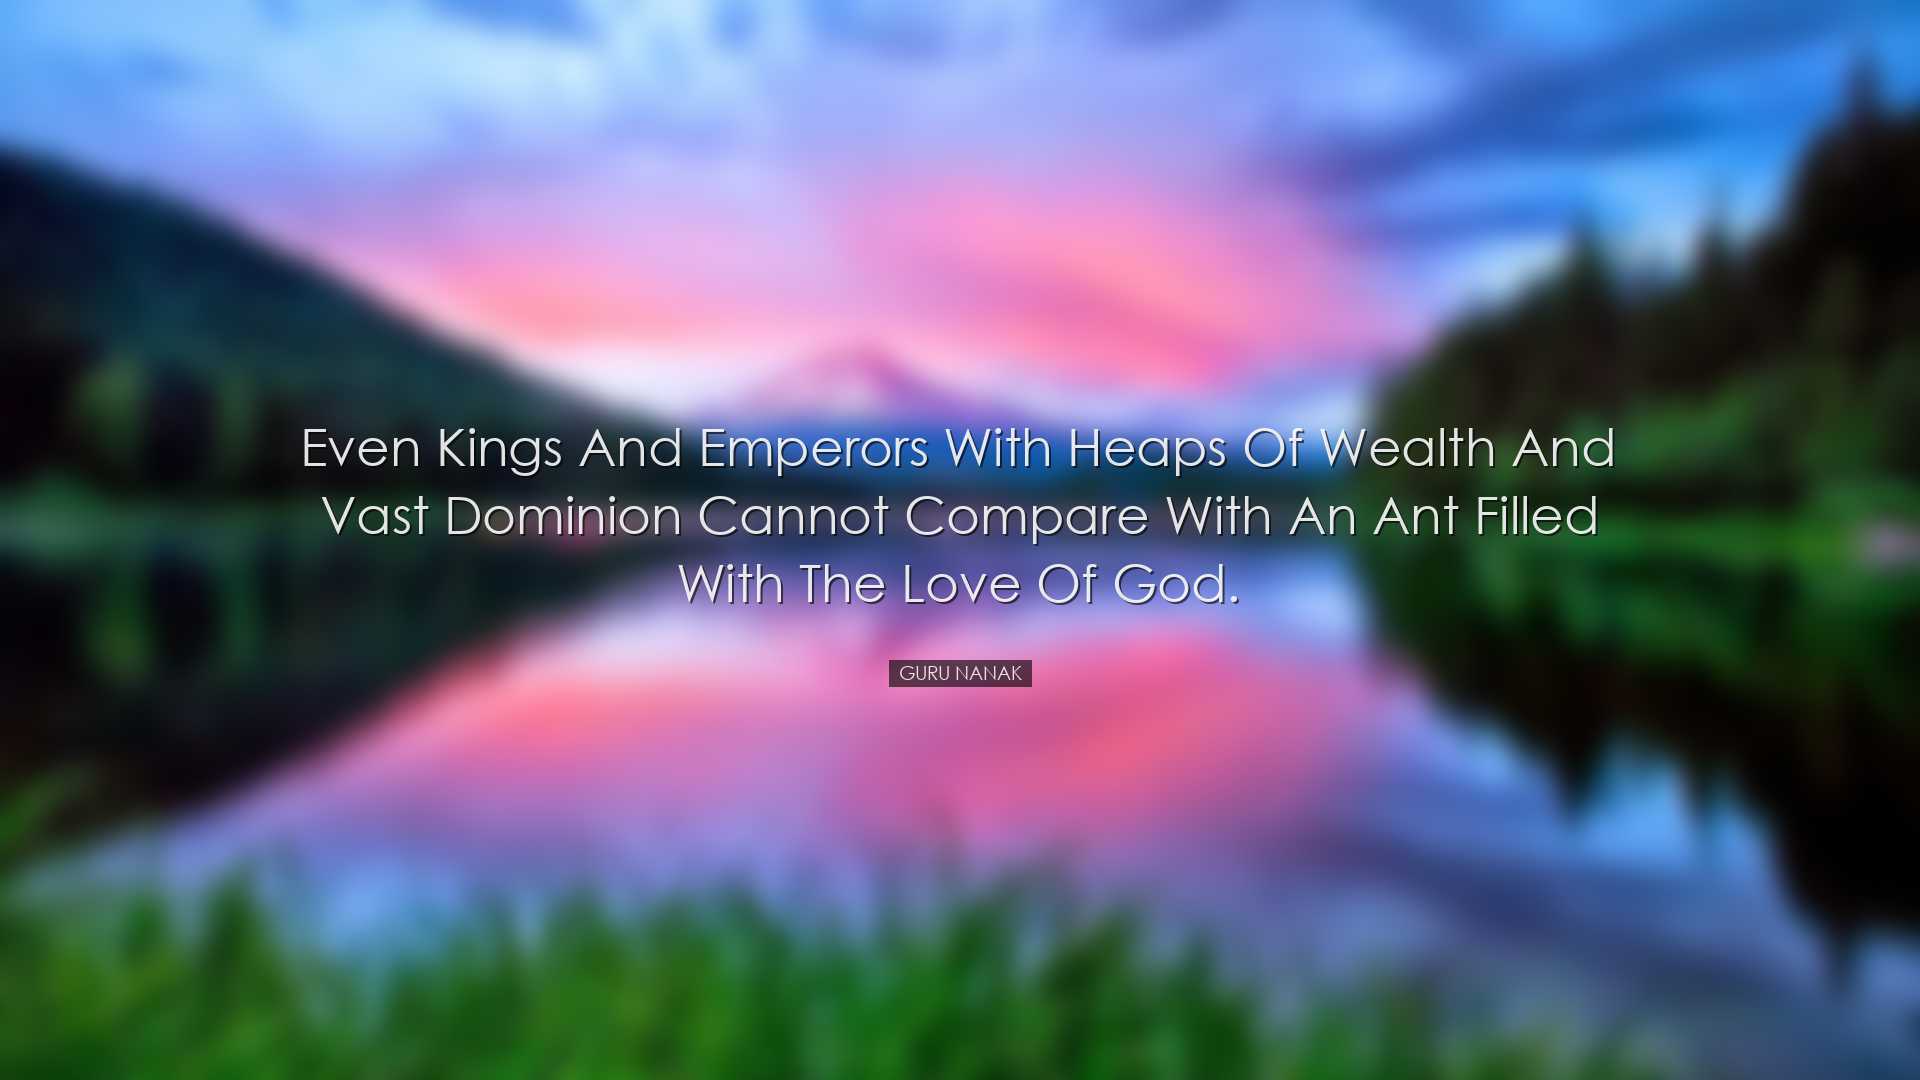 Even Kings and emperors with heaps of wealth and vast dominion can